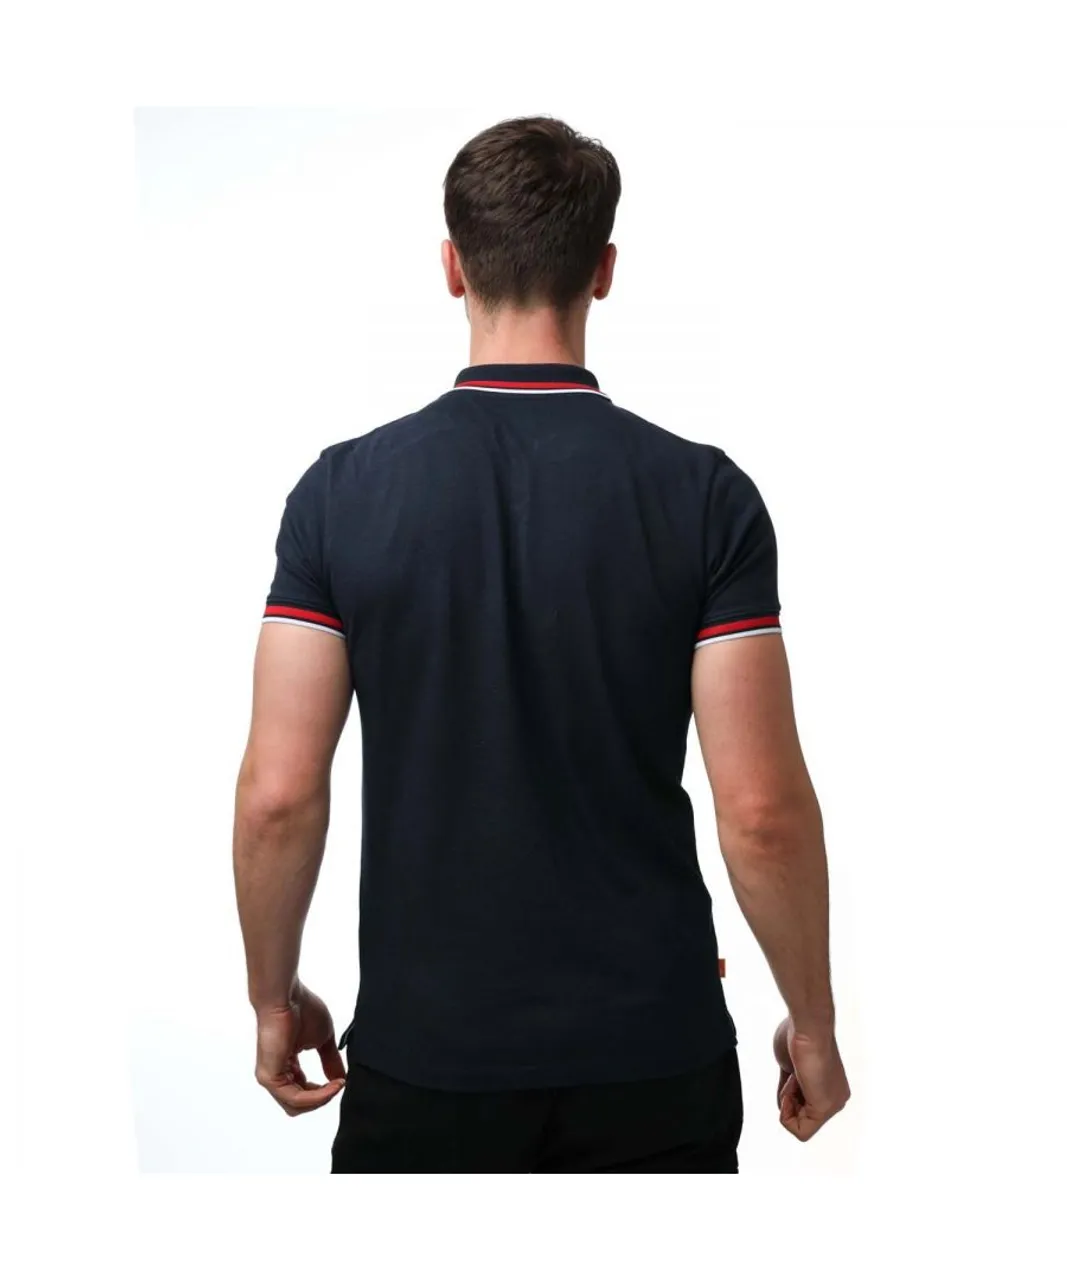 Timberland Mens Millers River Tipped Polo Shirt in Navy Cotton